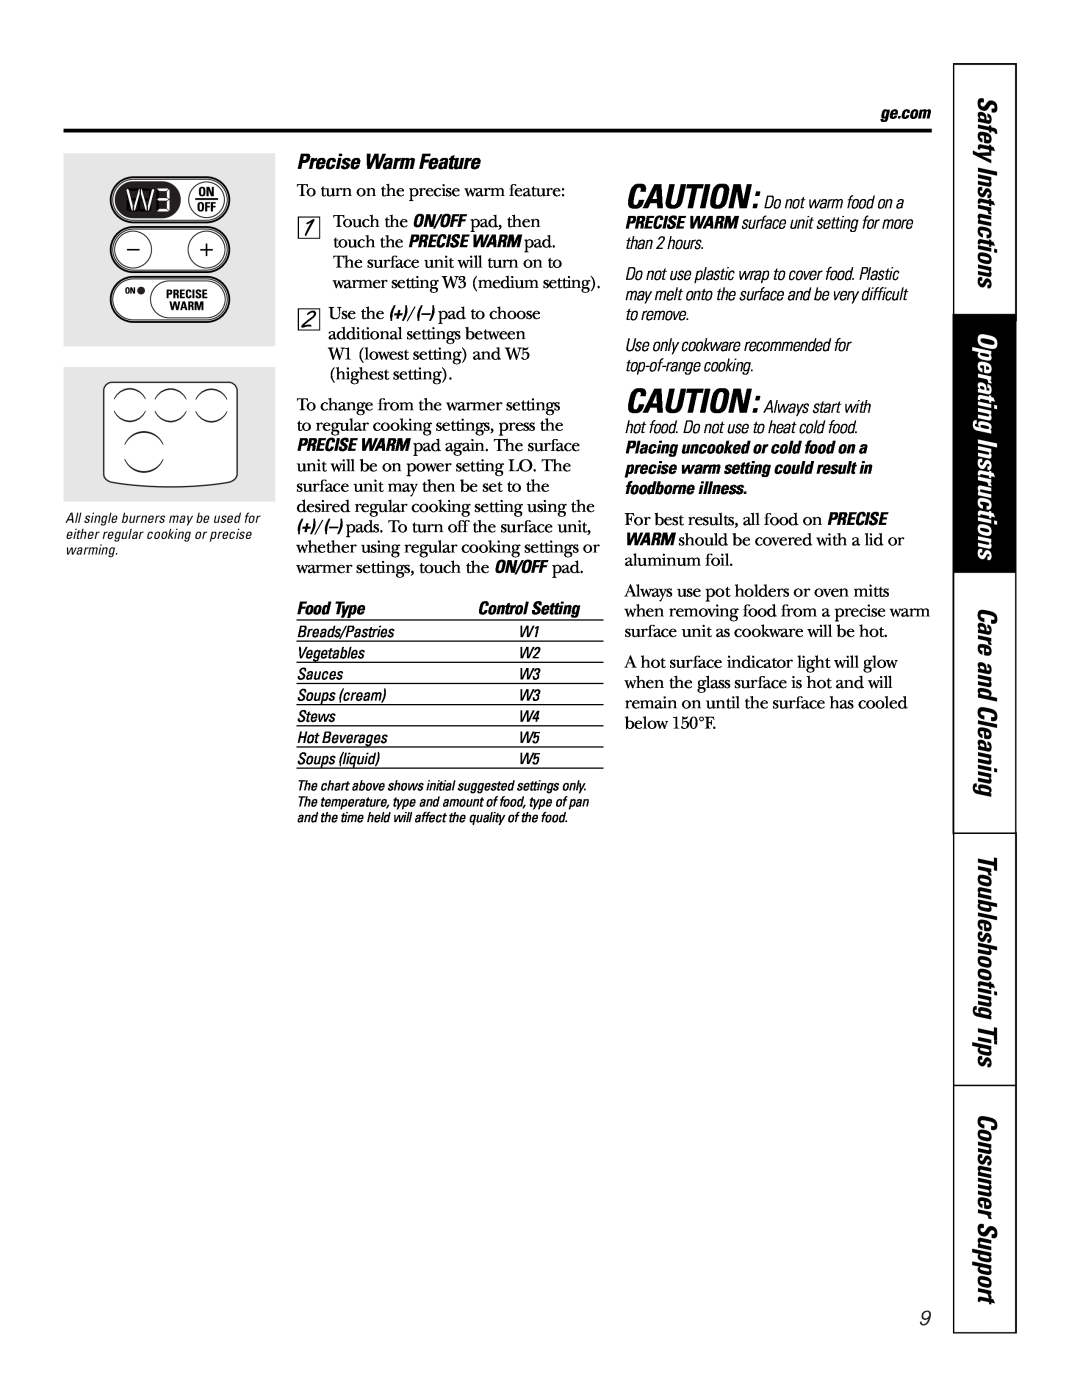 GE JB968 manual Troubleshooting Tips Consumer Support, Instructions Operating Instructions Care and Cleaning, Safety 